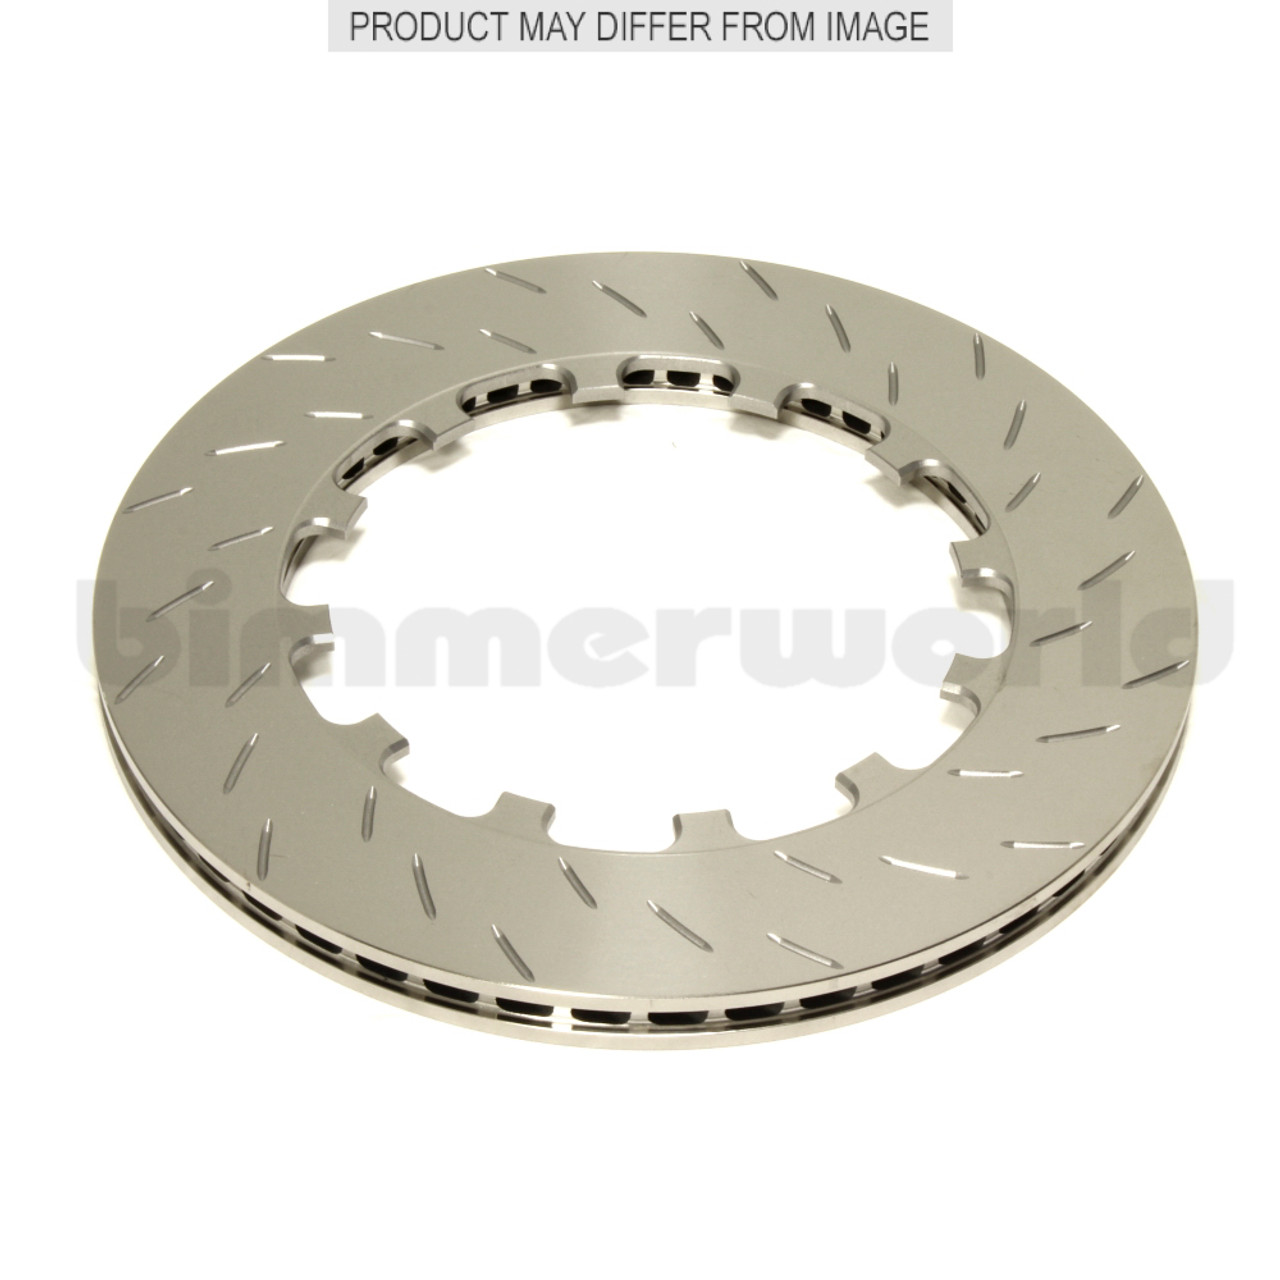 PFC Replacement V2 Disc/Ring - 355mm Slotted